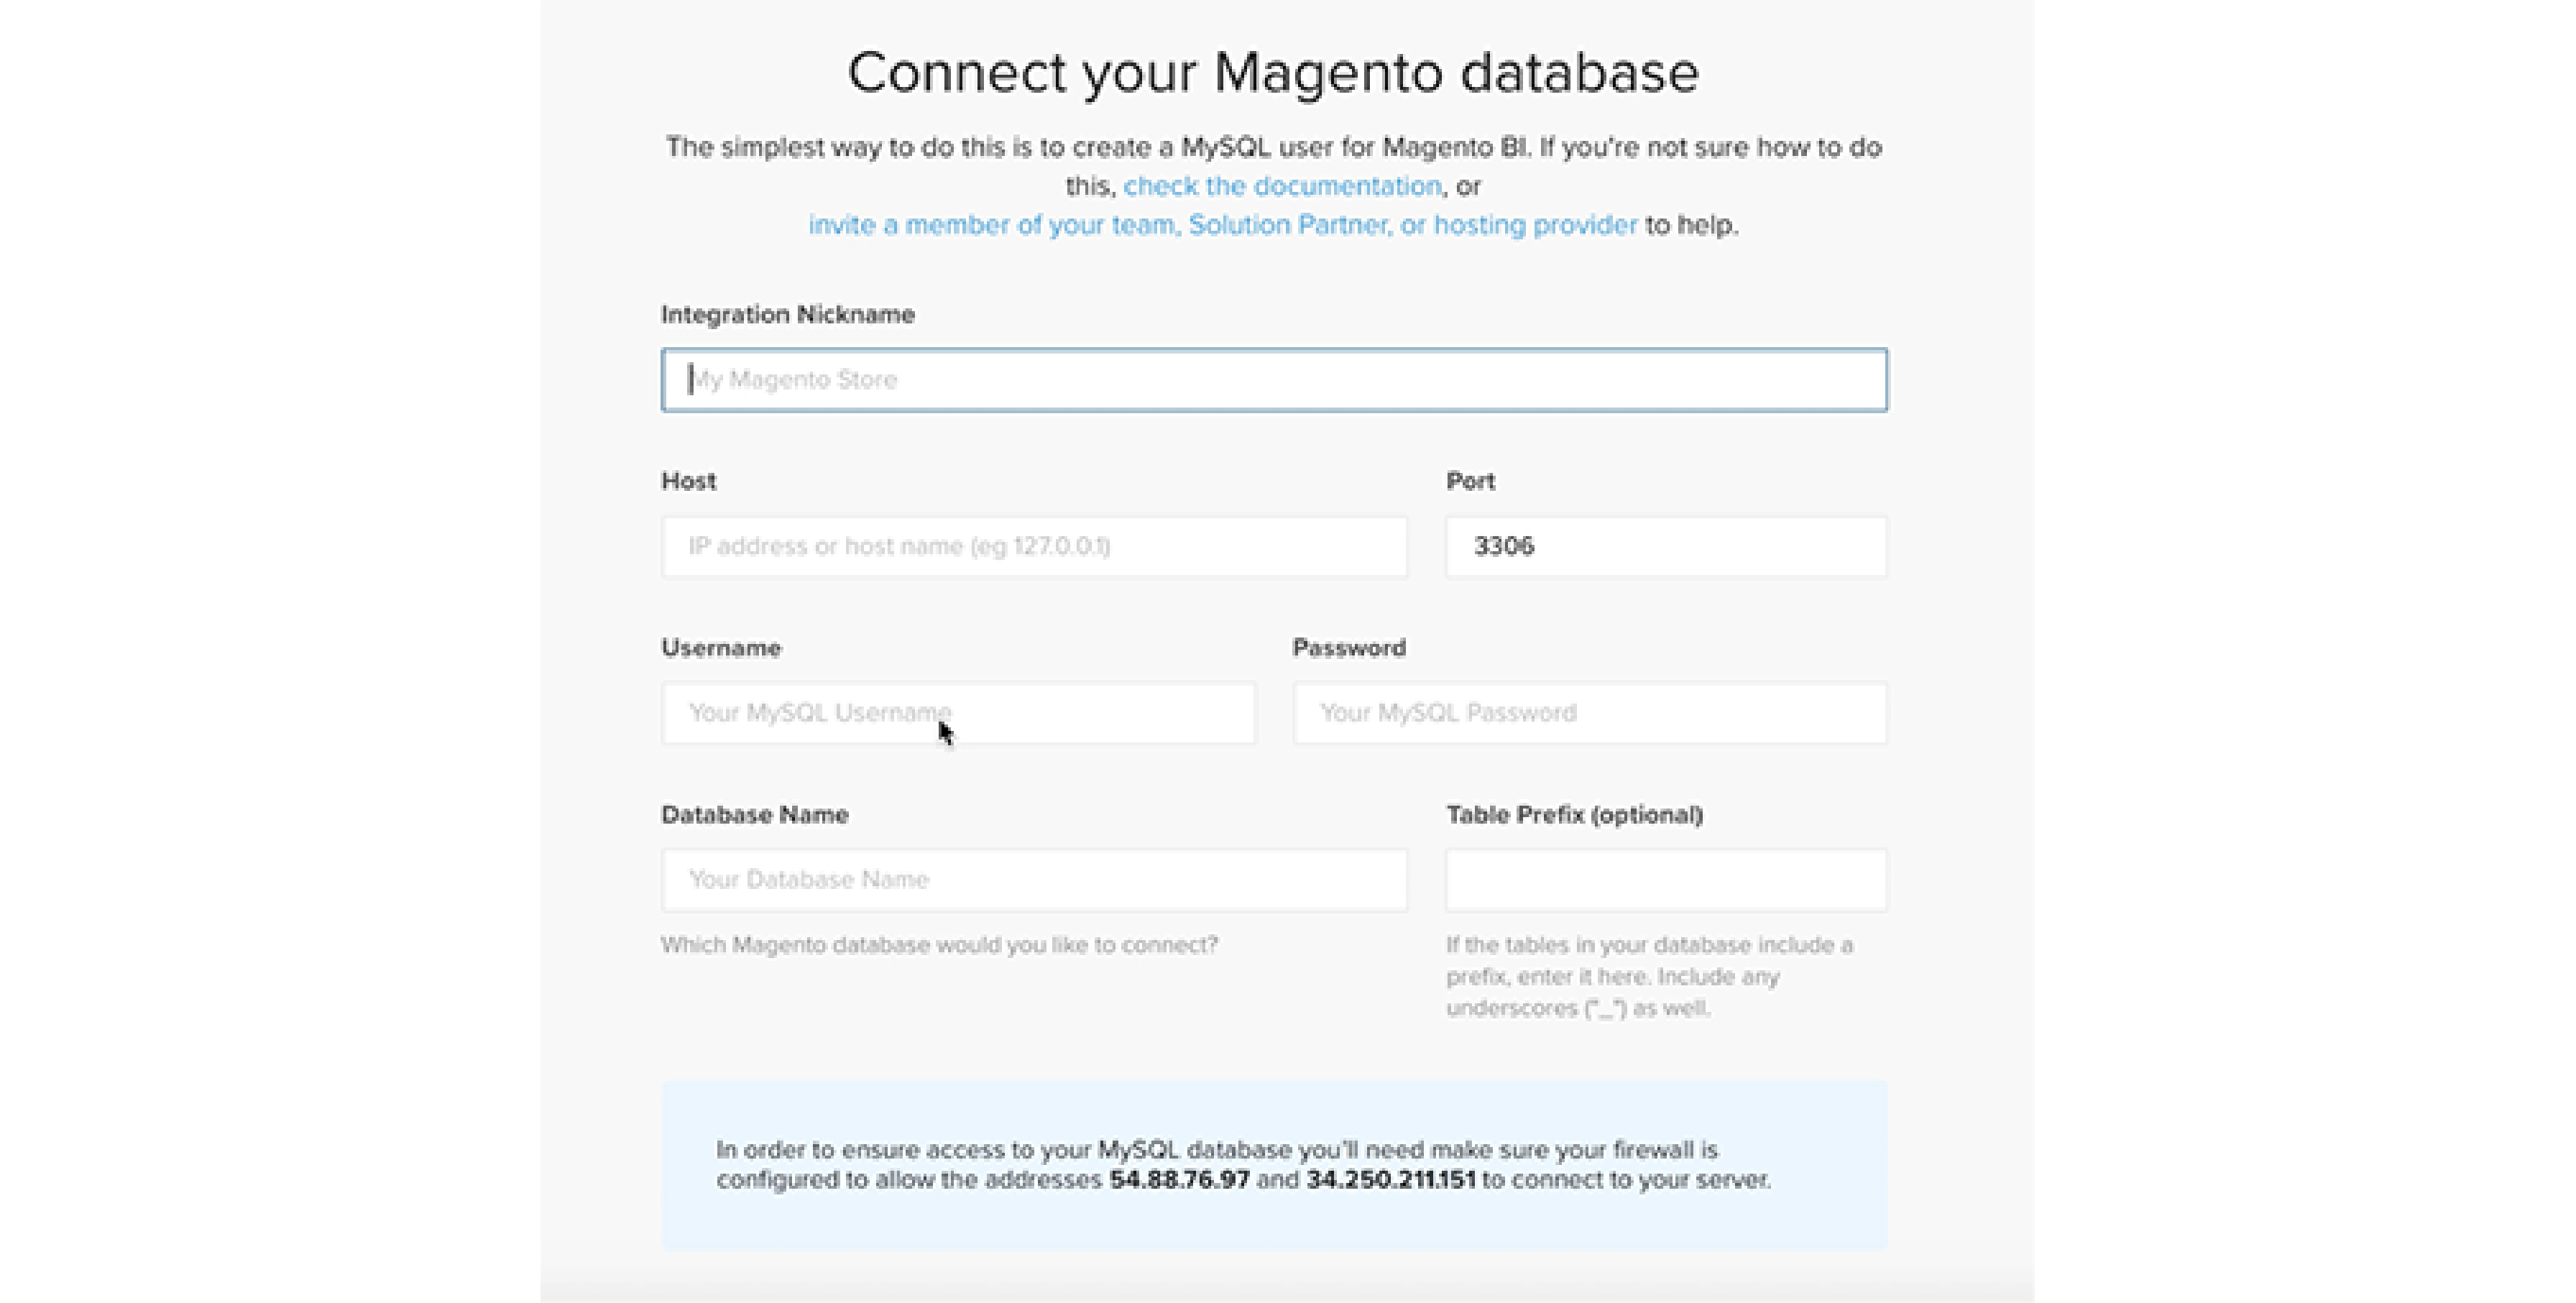 Step-by-Step Connection of Magento BI to Magento Database